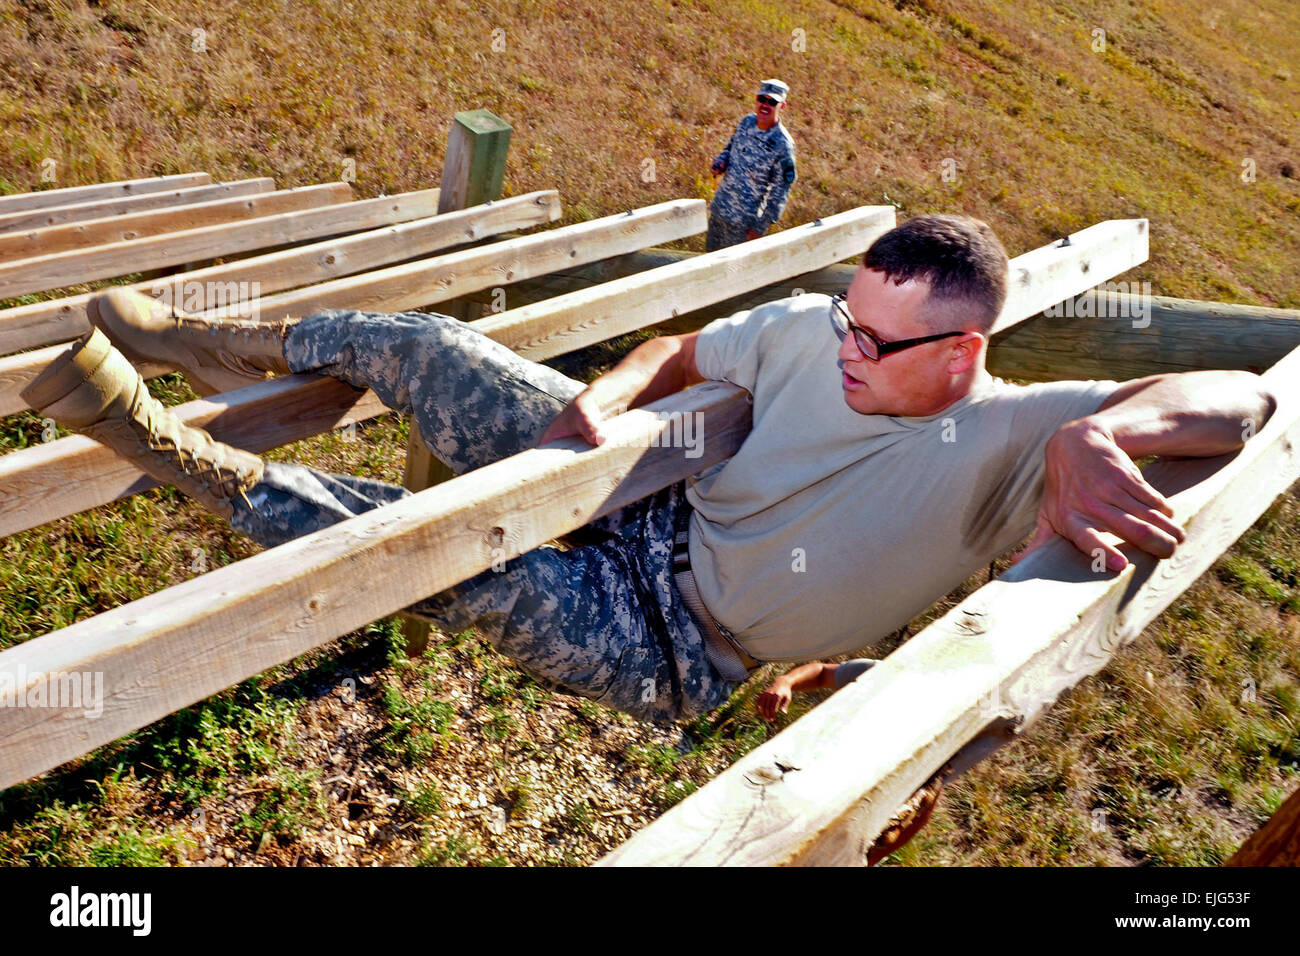 Sgt. James Dvorak weaves through a wooden ladder on West Camp Rapid’s obstacle course during the South Dakota National Guard’s state Noncommissioned Officer of the Year competition Oct. 1, 2011. Dvorak went on to win the competition, becoming the state’s NCO of the Year. SDNG photo by Spc. Julieanne Morse Stock Photo